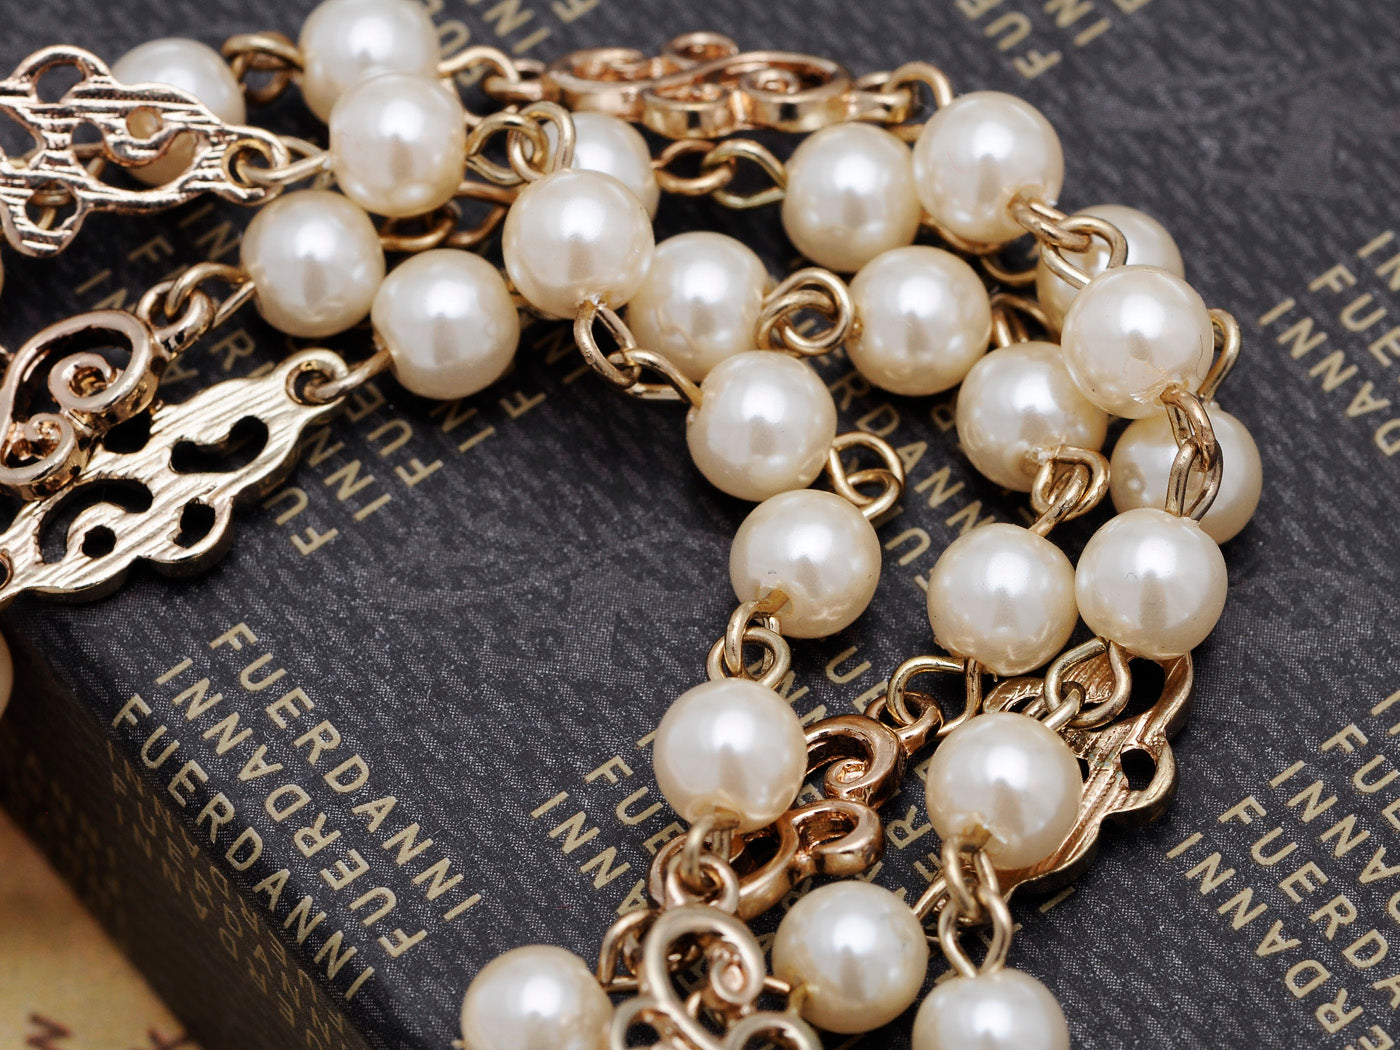 Faux Pearls Swirl Chain Chunky Statement Necklace